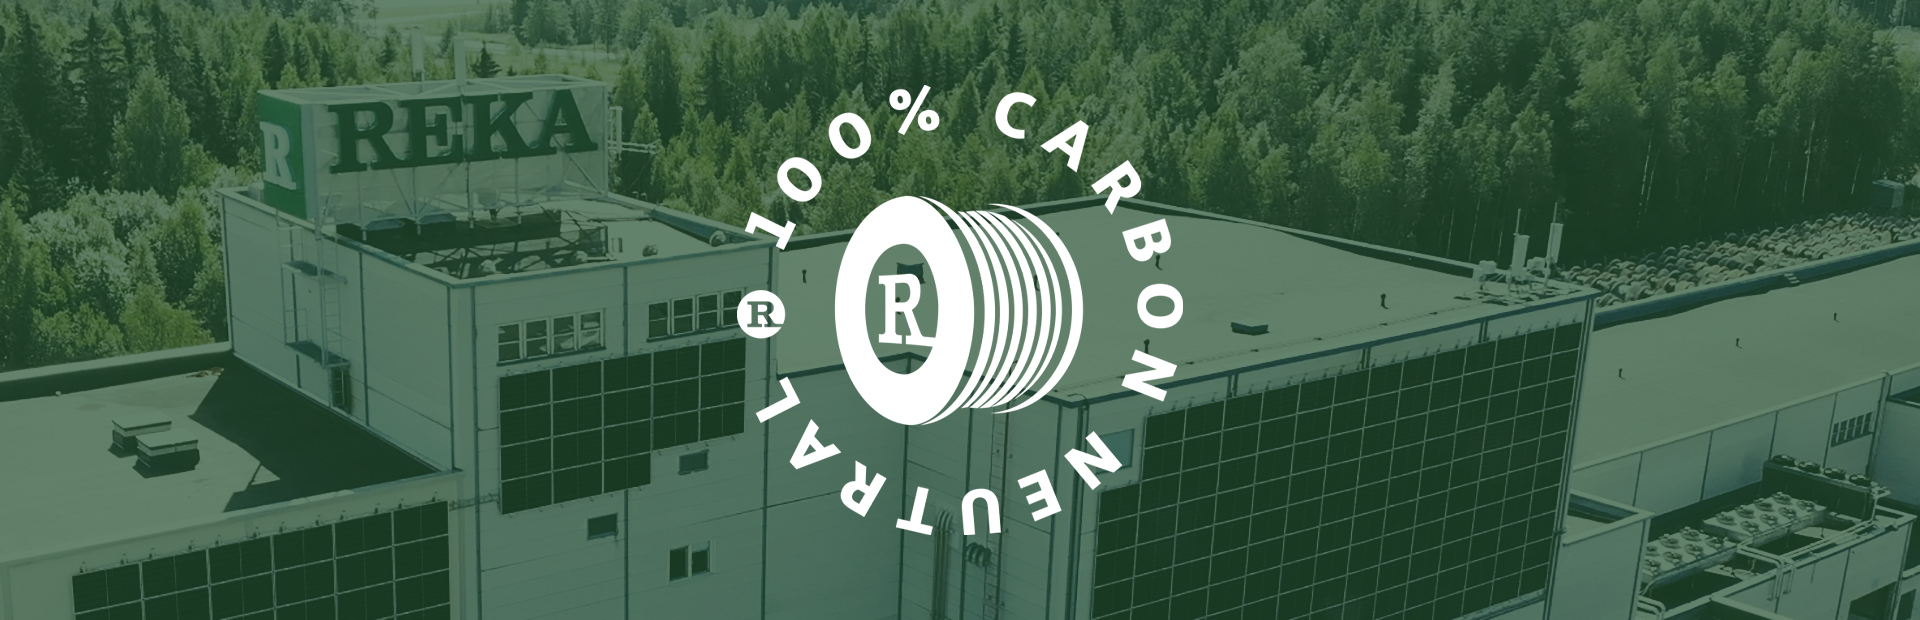 reka cables, carbon neutral logo and pic of the factory in Riihimäki